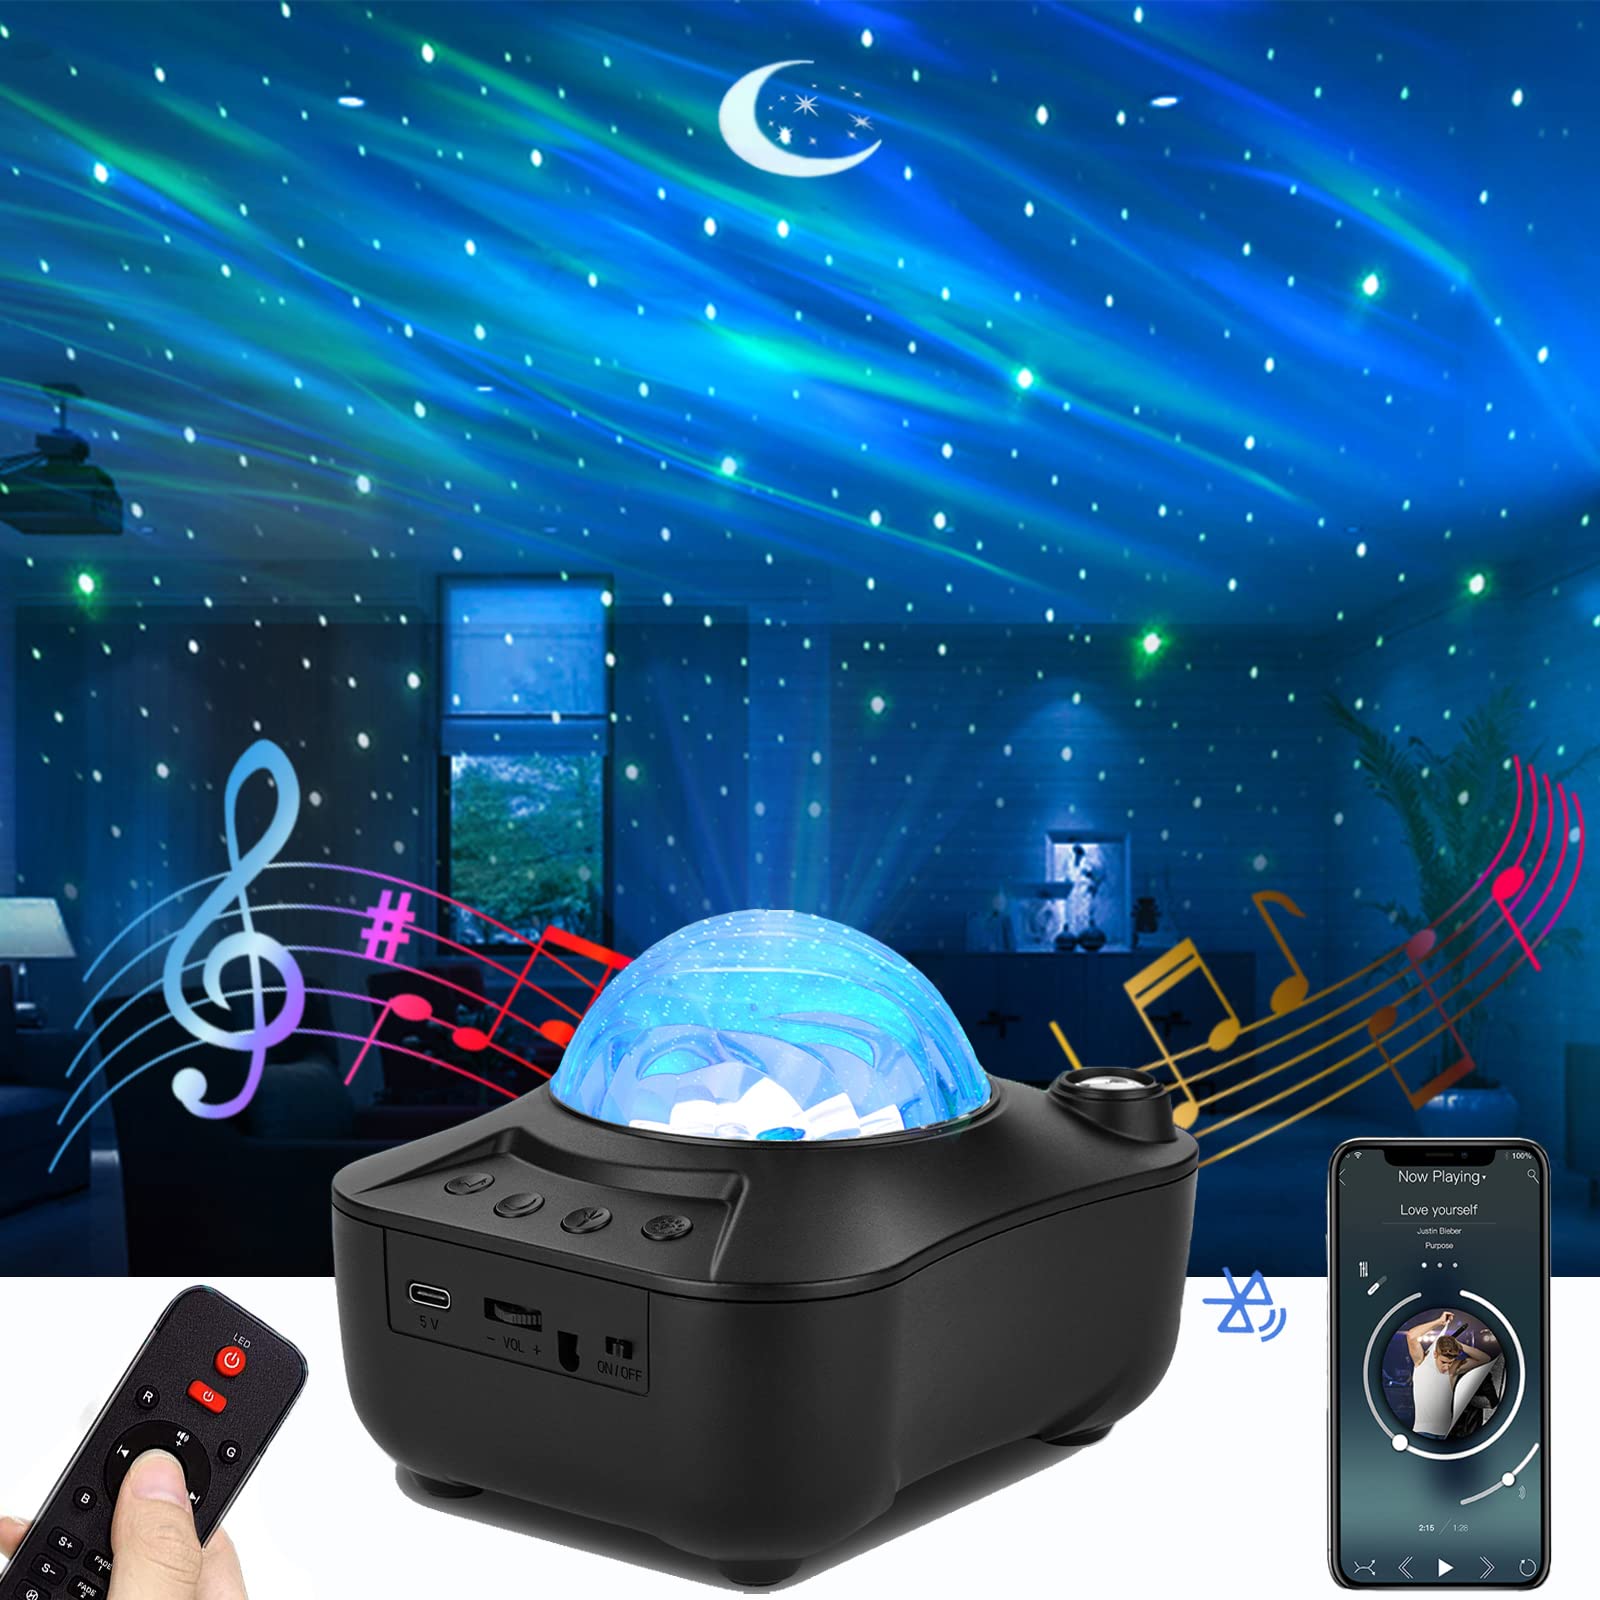 Star Projector, Aurora Starry Moon LED Night Light with White Noise, Bluetooth Speaker,Sound Sensor,Sleep Soothing Color Changing Lamp for Baby Kids Adult Room Bedroom Decoration Christmas Gift